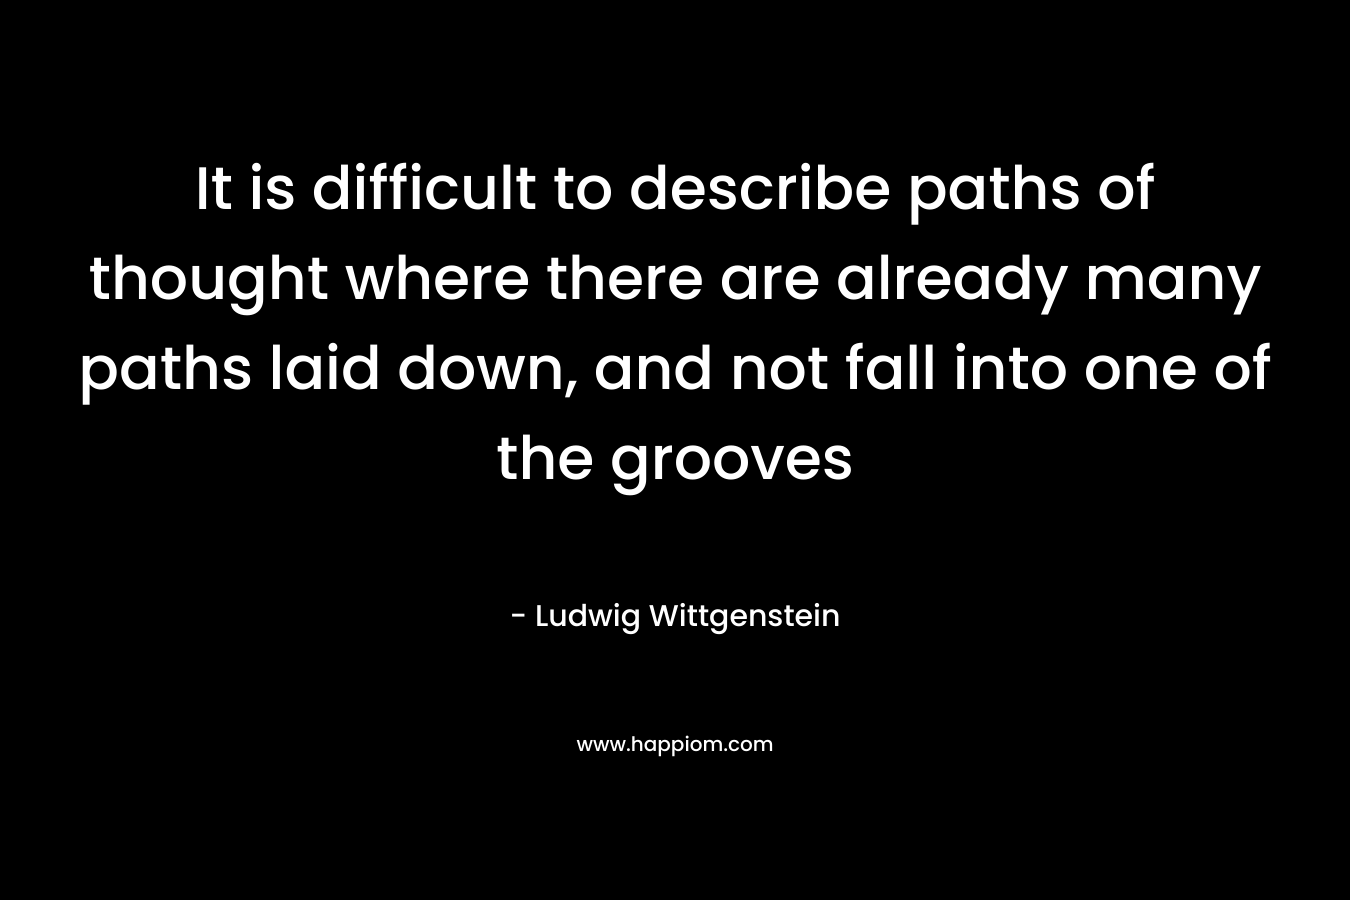 It is difficult to describe paths of thought where there are already many paths laid down, and not fall into one of the grooves